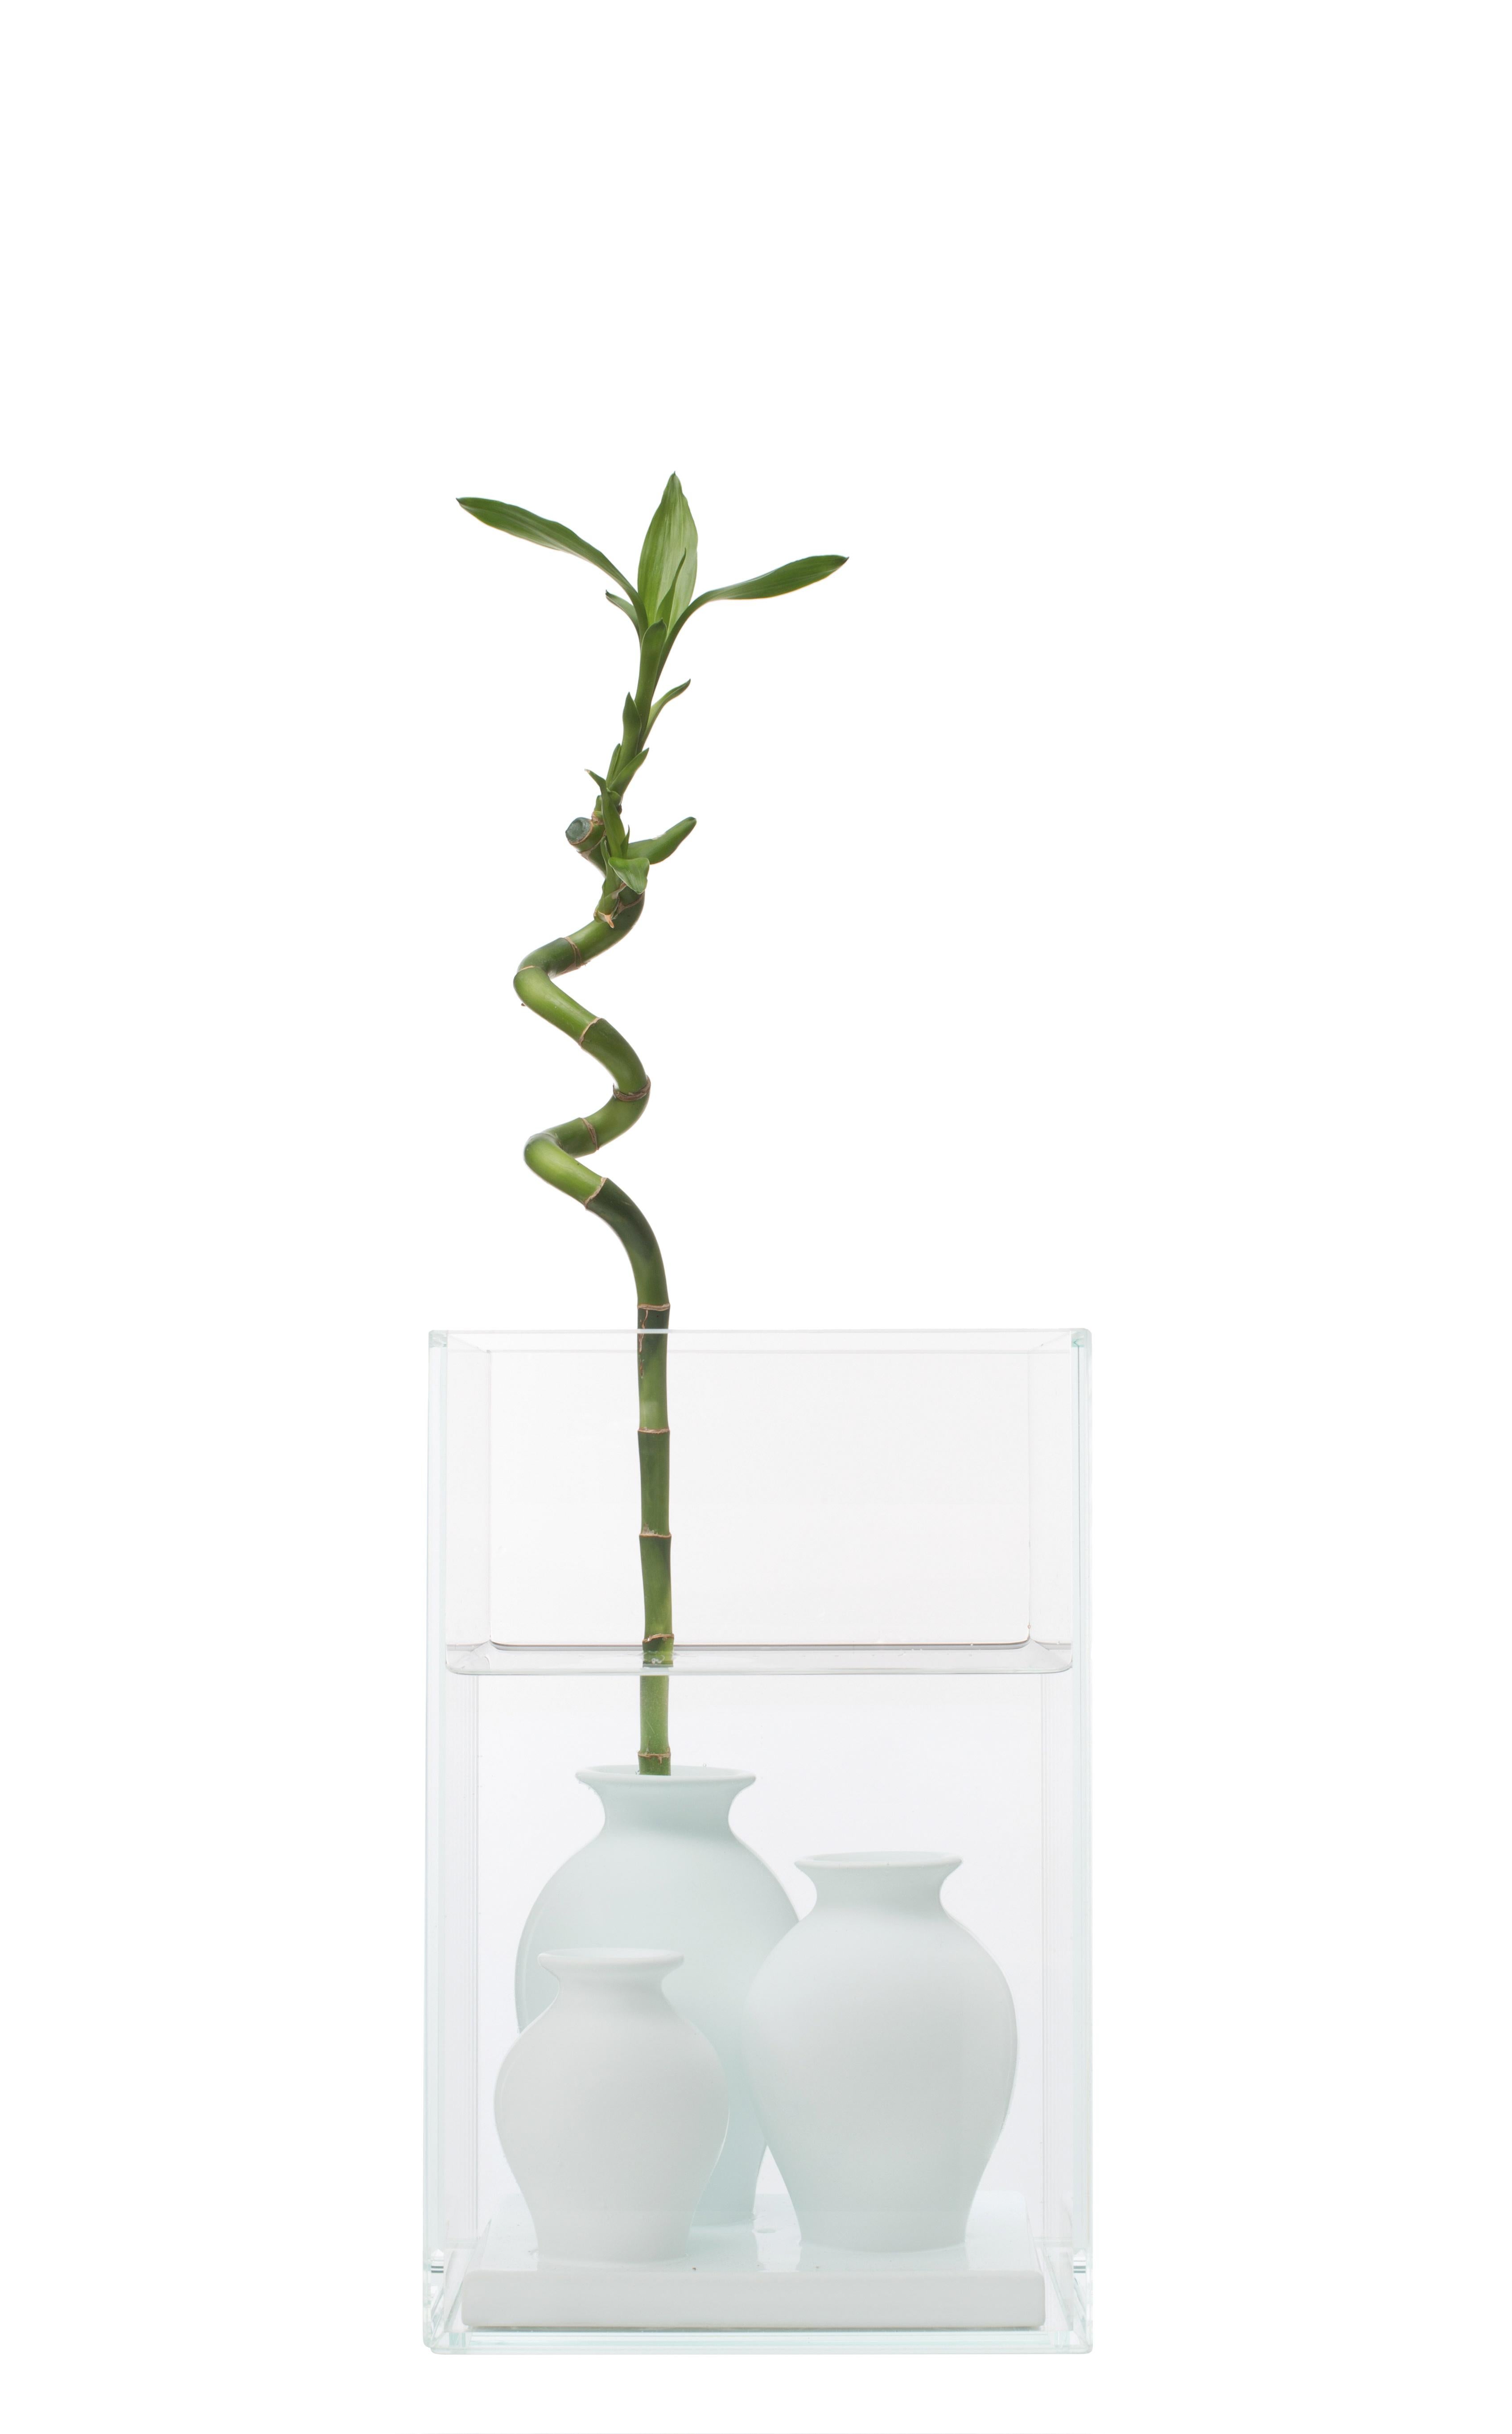 The Atlantis vase, by Tommaso Nani and Noa Ikeuchi, was born from the dialogue between two material elements. This piece, beyond its function as a decorative receptacle, is also meant to valorise the intimate ritual gesture of flower arranging,